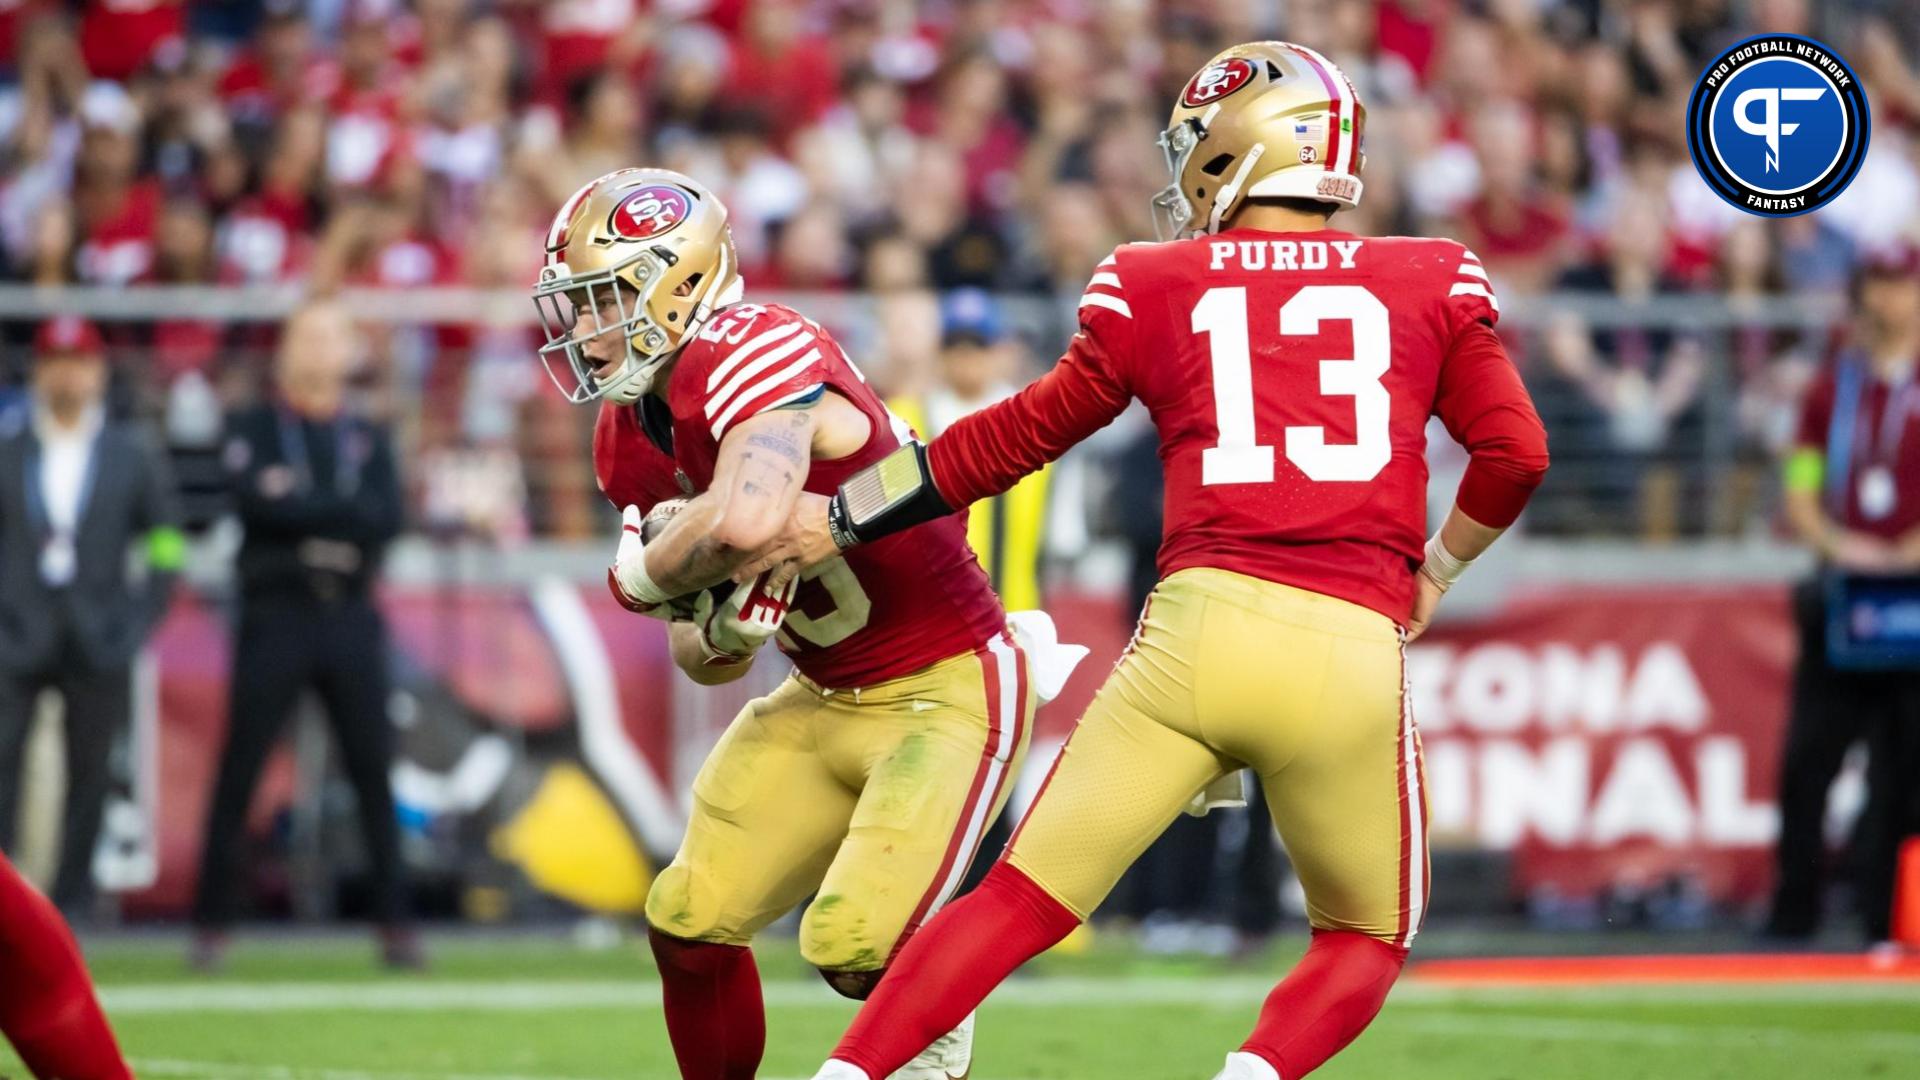 San Francisco 49ers quarterback Brock Purdy (13) hands off the ball to running back Christian McCaffrey (23) against the Arizona Cardinals at State Farm Stadium.